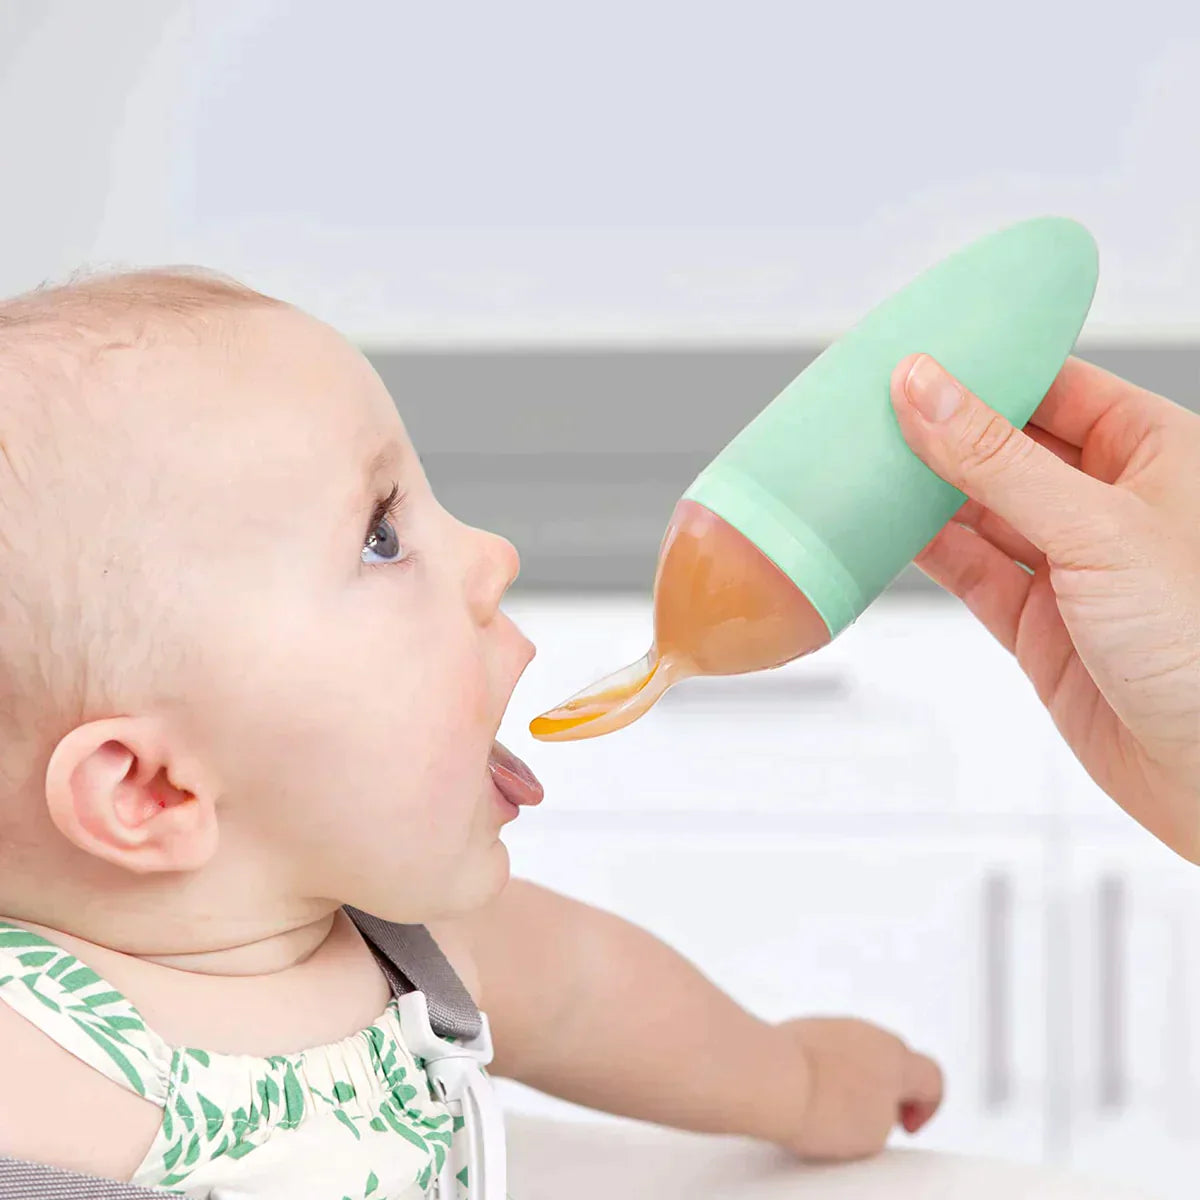 Squirt Silicone Baby Food Dispensing Spoon - Mint Green